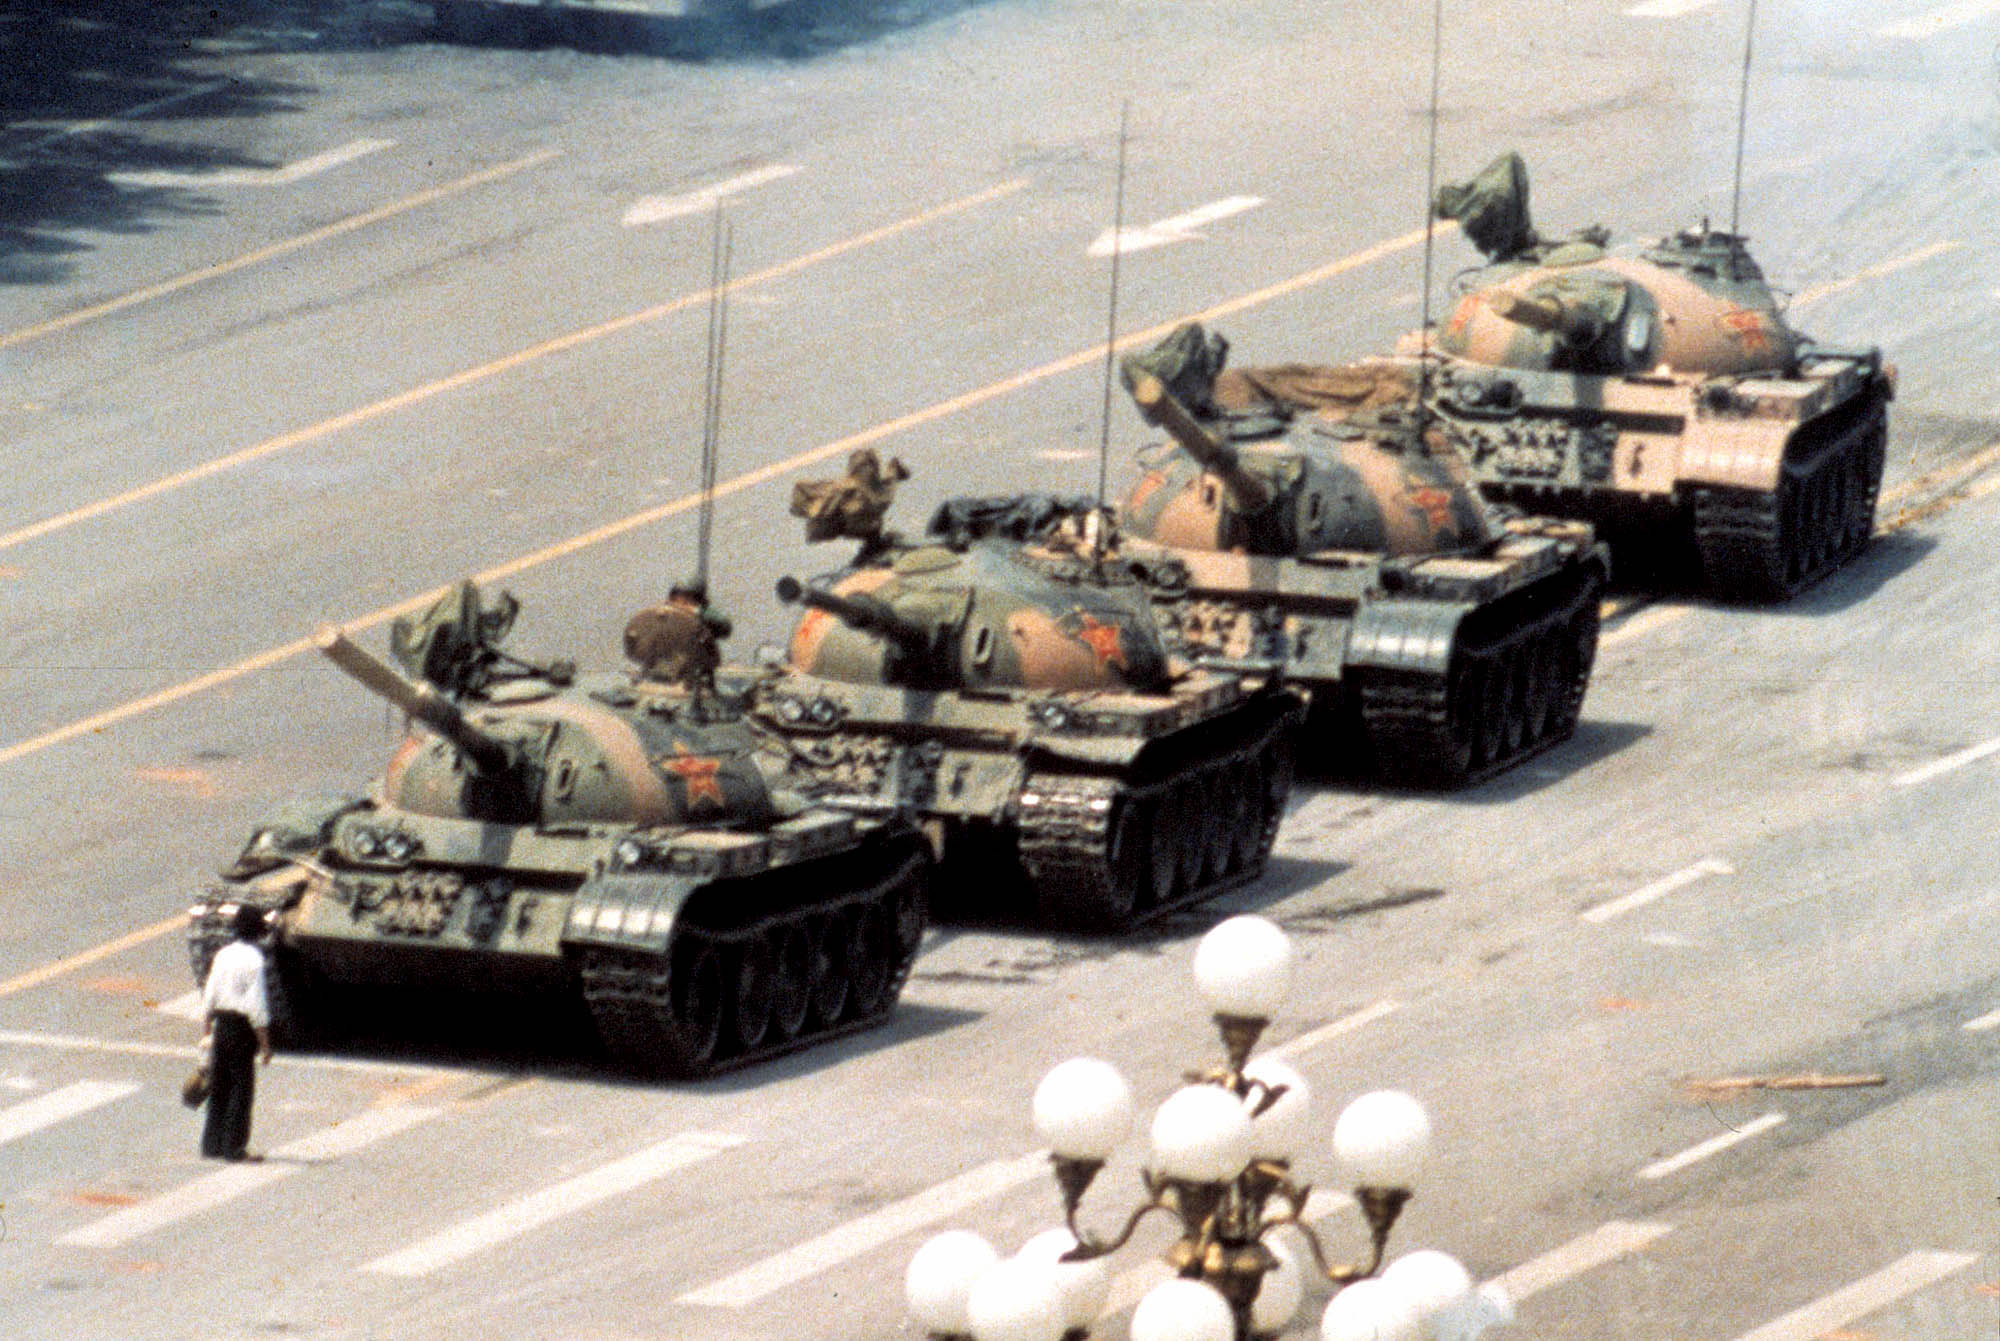 the-iconic-photo-of-tank-man-the-unknown-rebel-who-stood-in-front-of-a-column-of-chinese-tanks-in-an-act-of-defiance-following-the-tiananmen-square-protests-of-1989